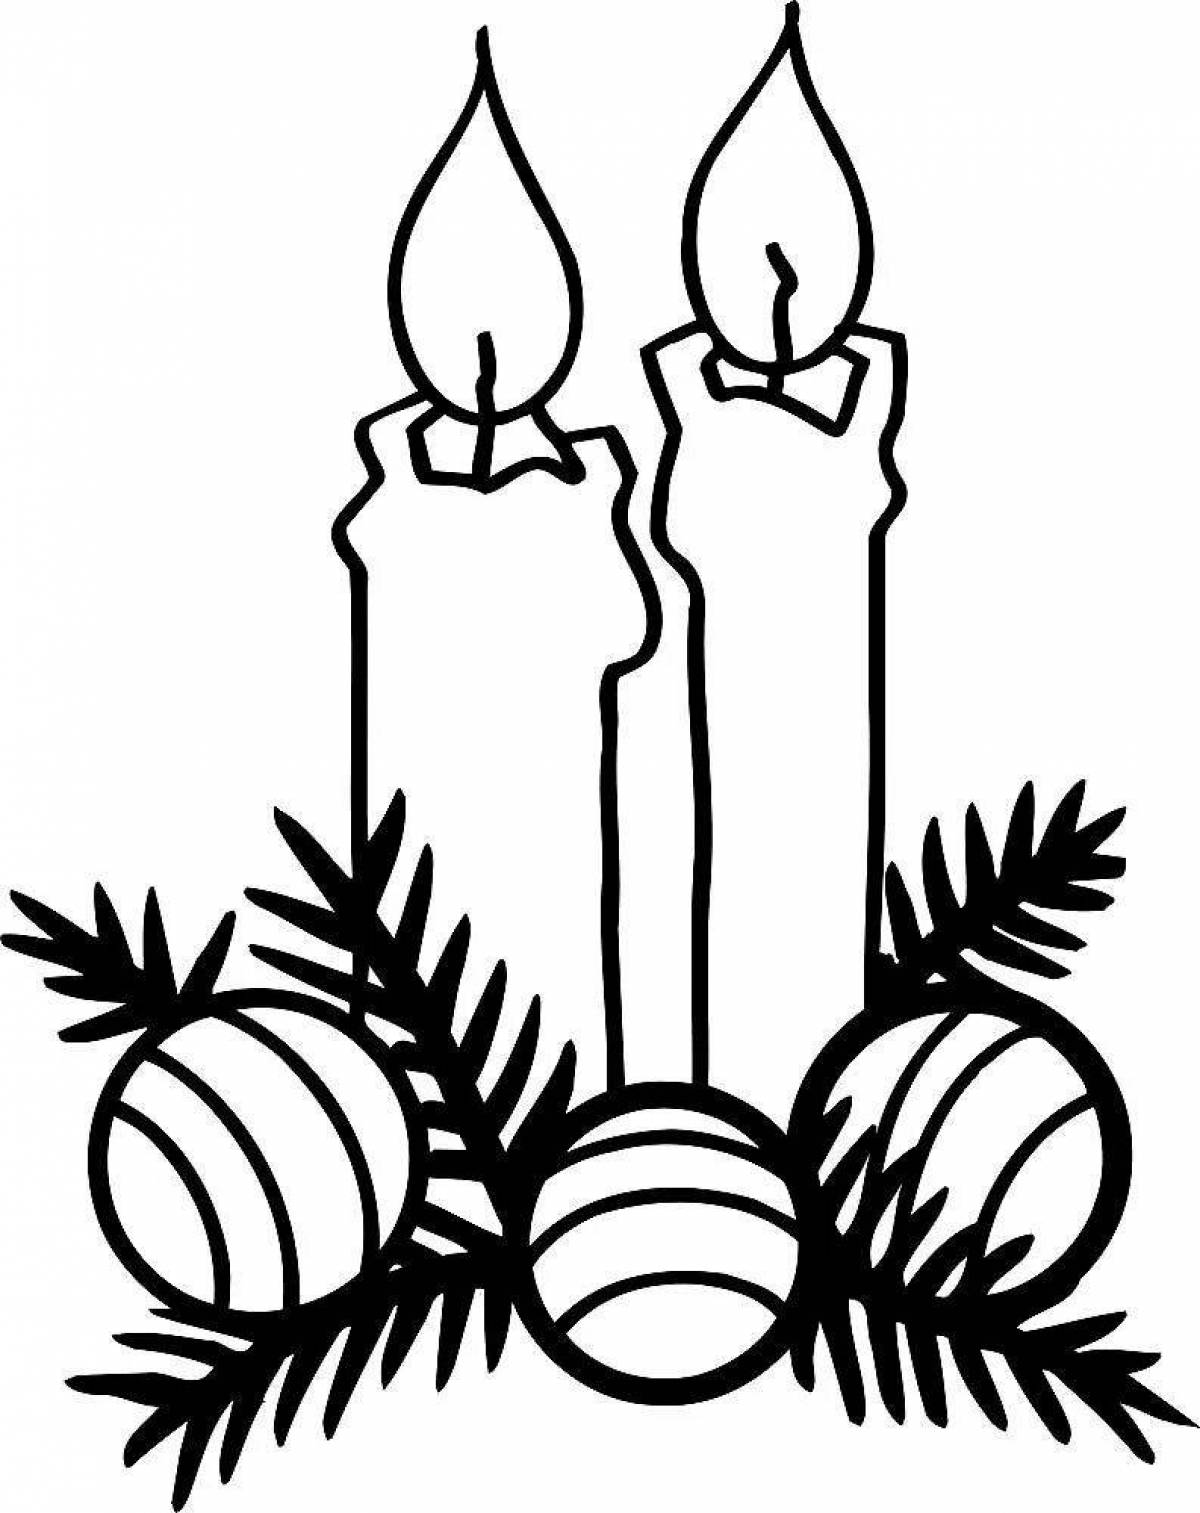 Luminous Christmas Candle coloring book for kids